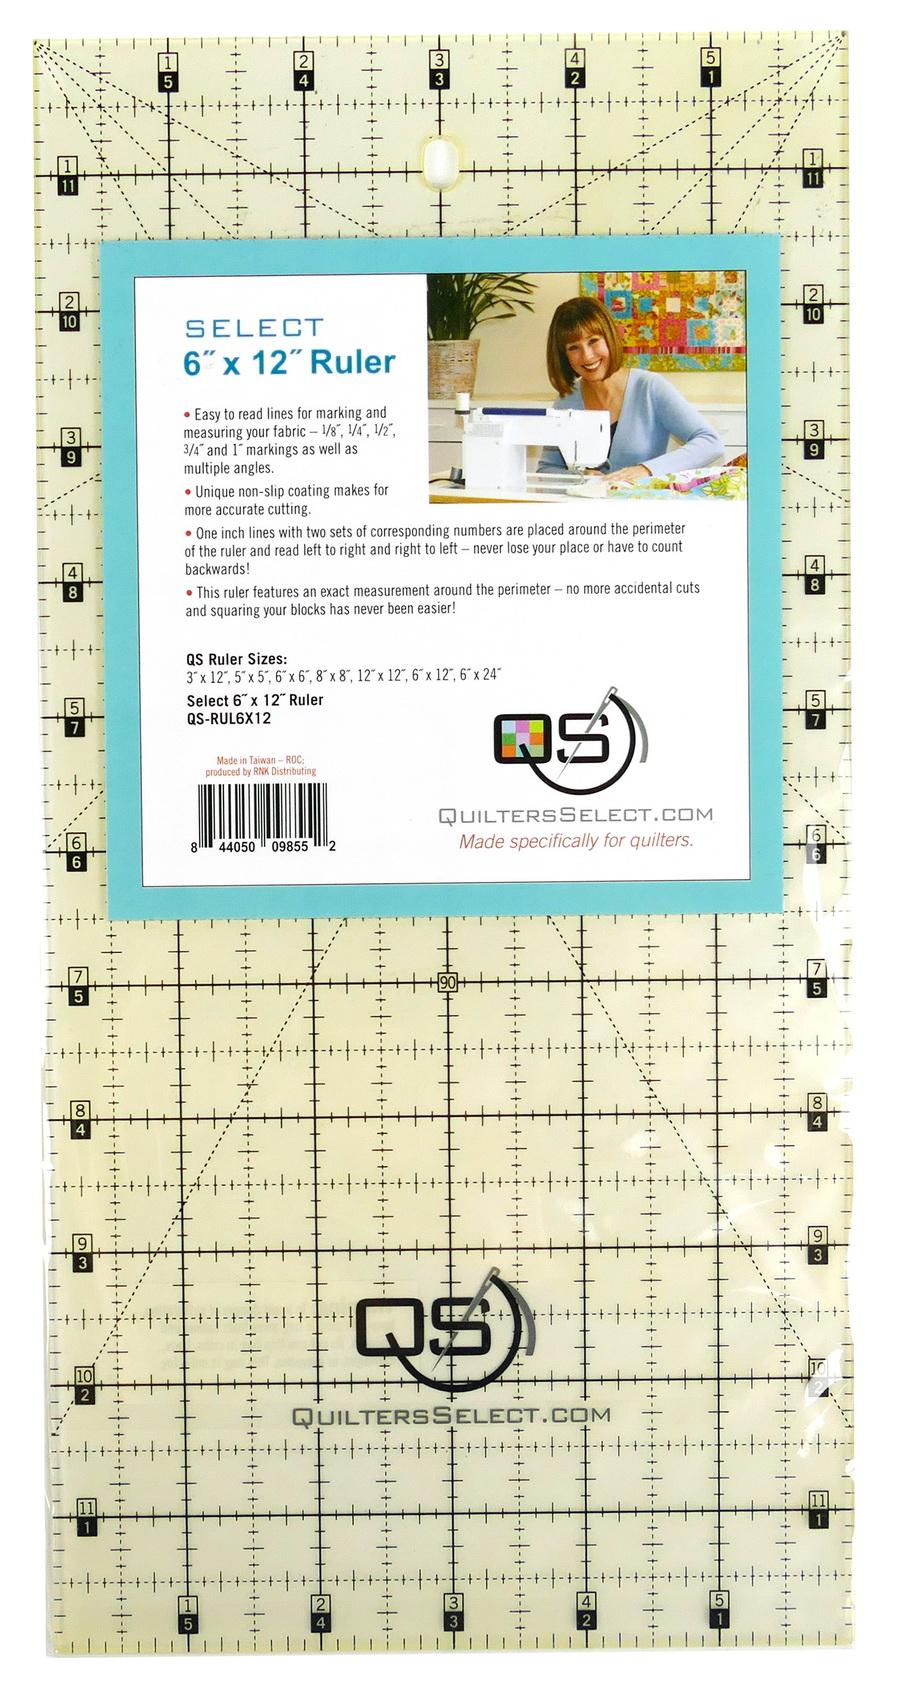 Fons & Porter Hand Quilting Needle Sizes 7, 9 & 10 20pcs by Fons